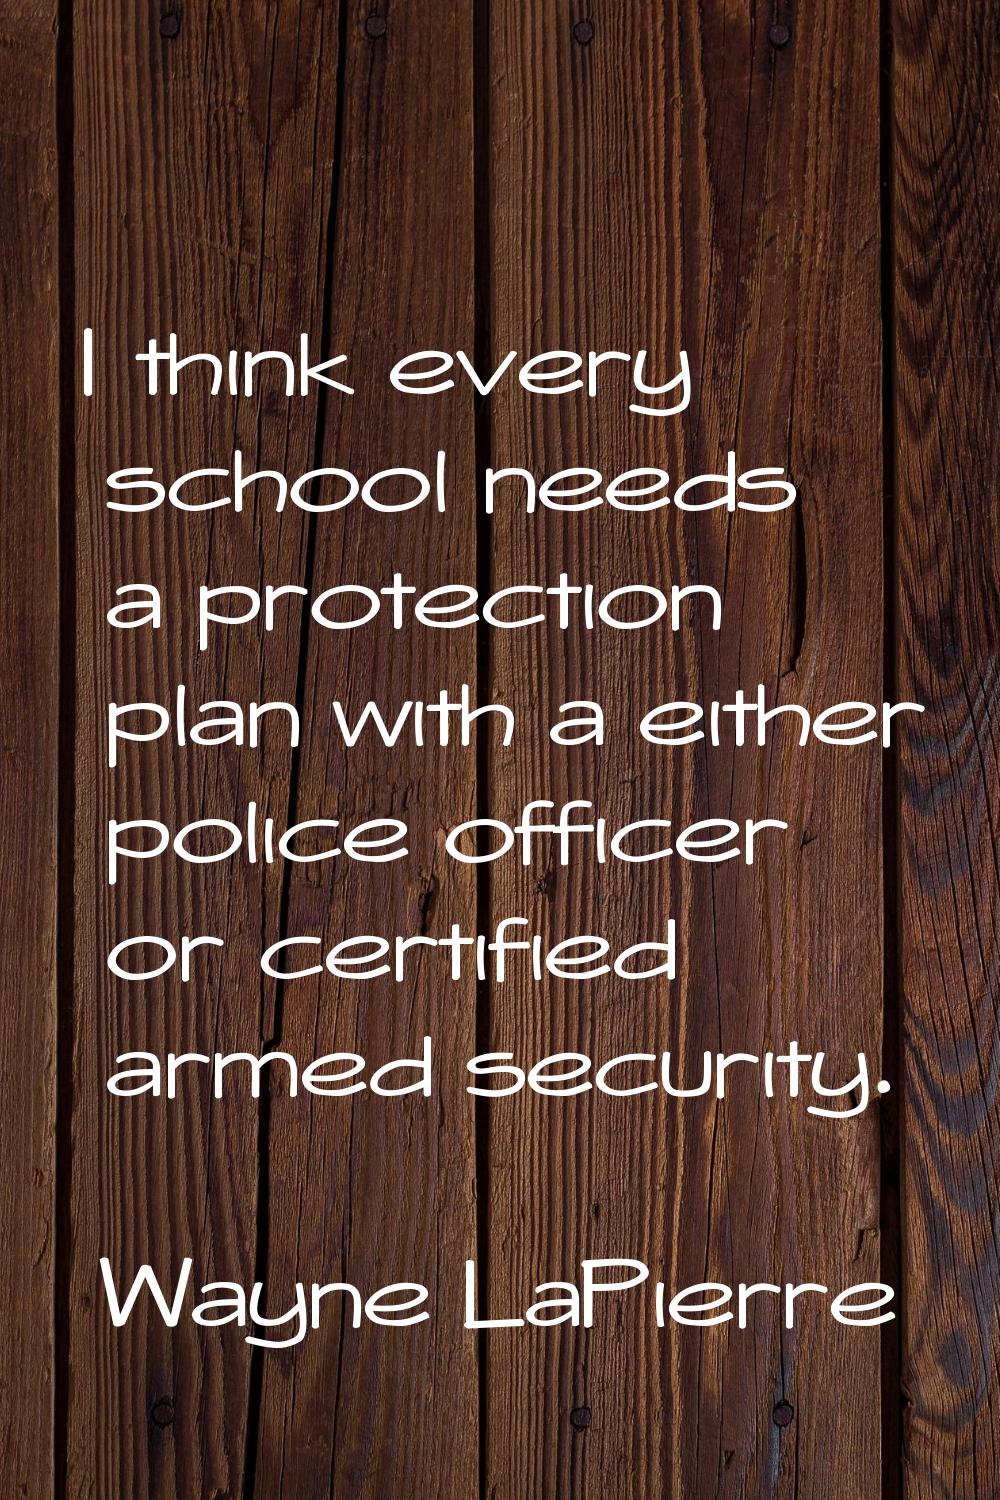 I think every school needs a protection plan with a either police officer or certified armed securi